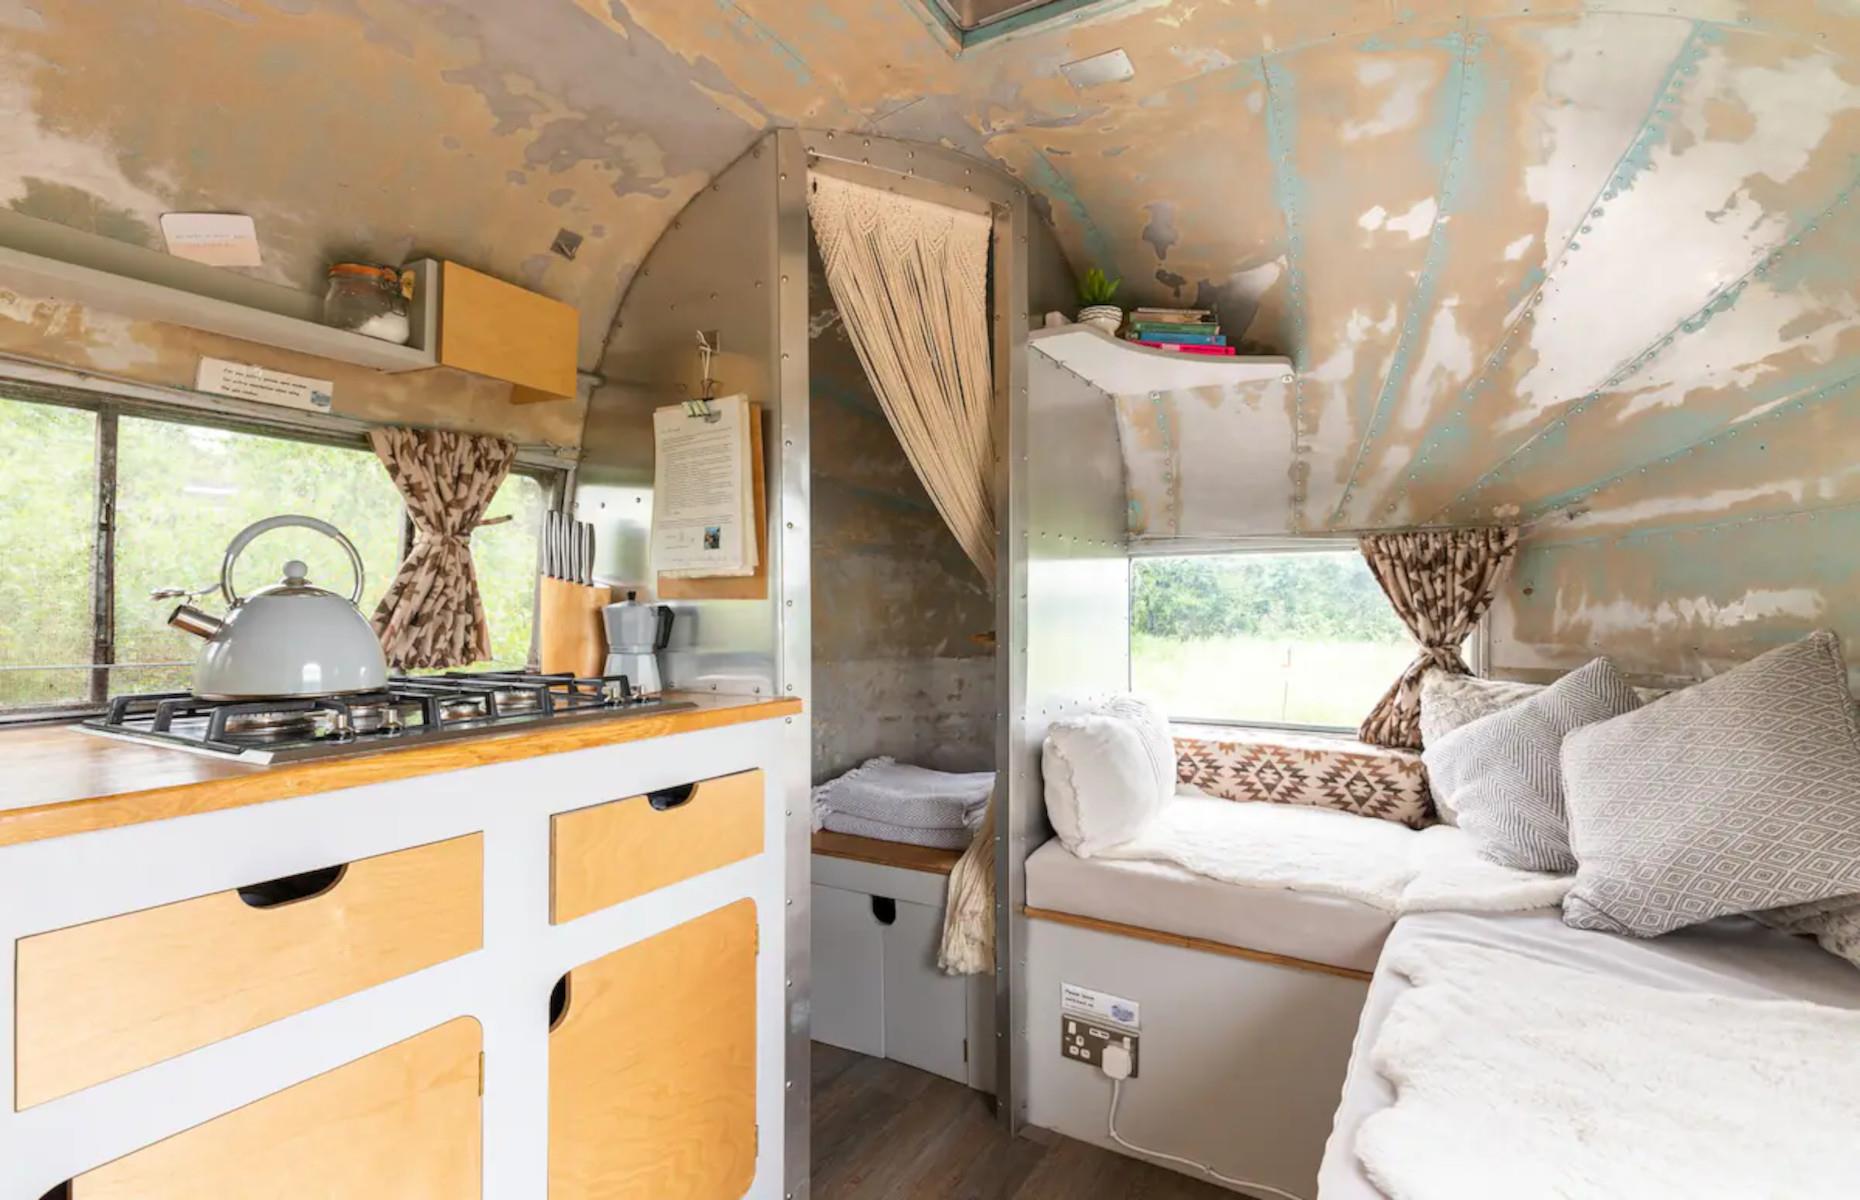 <p>Tucked away in a leafy spot with its own private meadow in Hereford in the UK, this beautifully restored 1956 Airstream boasts an unusual shabby-chic interior.</p>  <p>The rustic exposed roof and vintage yellow cabinetry add a quirky feel to this unique <a href="https://www.airbnb.co.uk/rooms/49959548">Airbnb</a> space.</p>